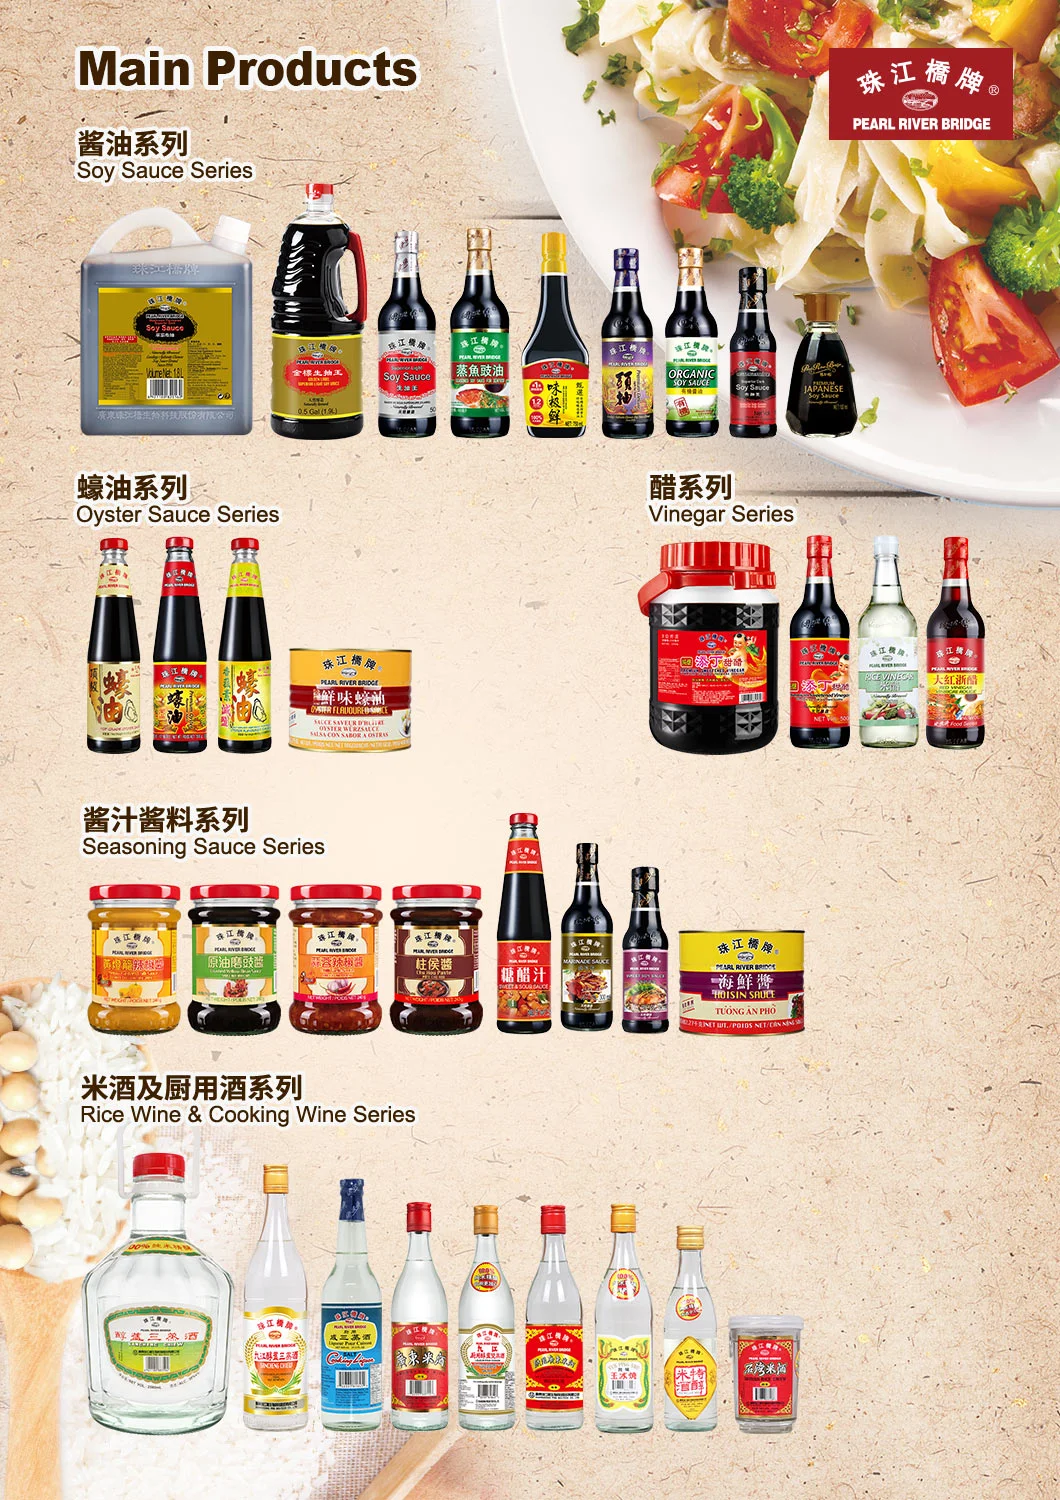 Pearl River Bridge Brand Organic Soy Sauce 150ml Table Bottles for Home/Restaurant/Supermarket with Low Price